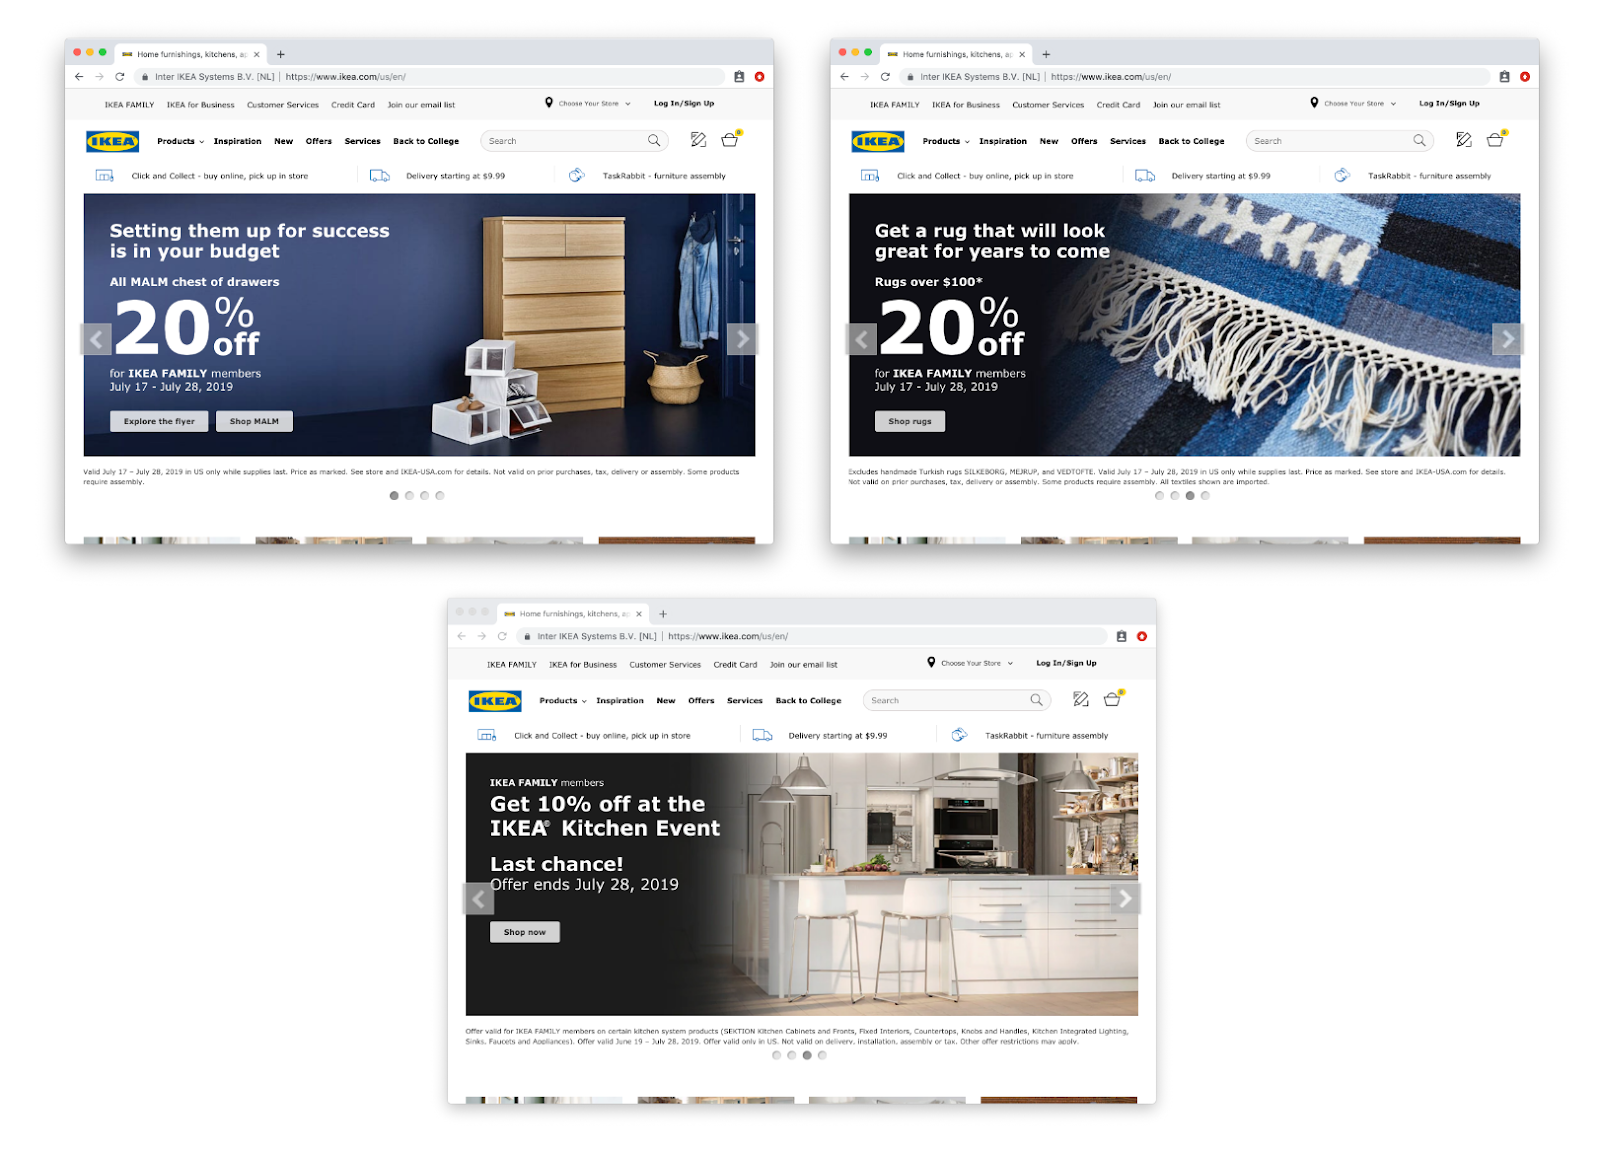 Ikea discounts in a homepage image carousel